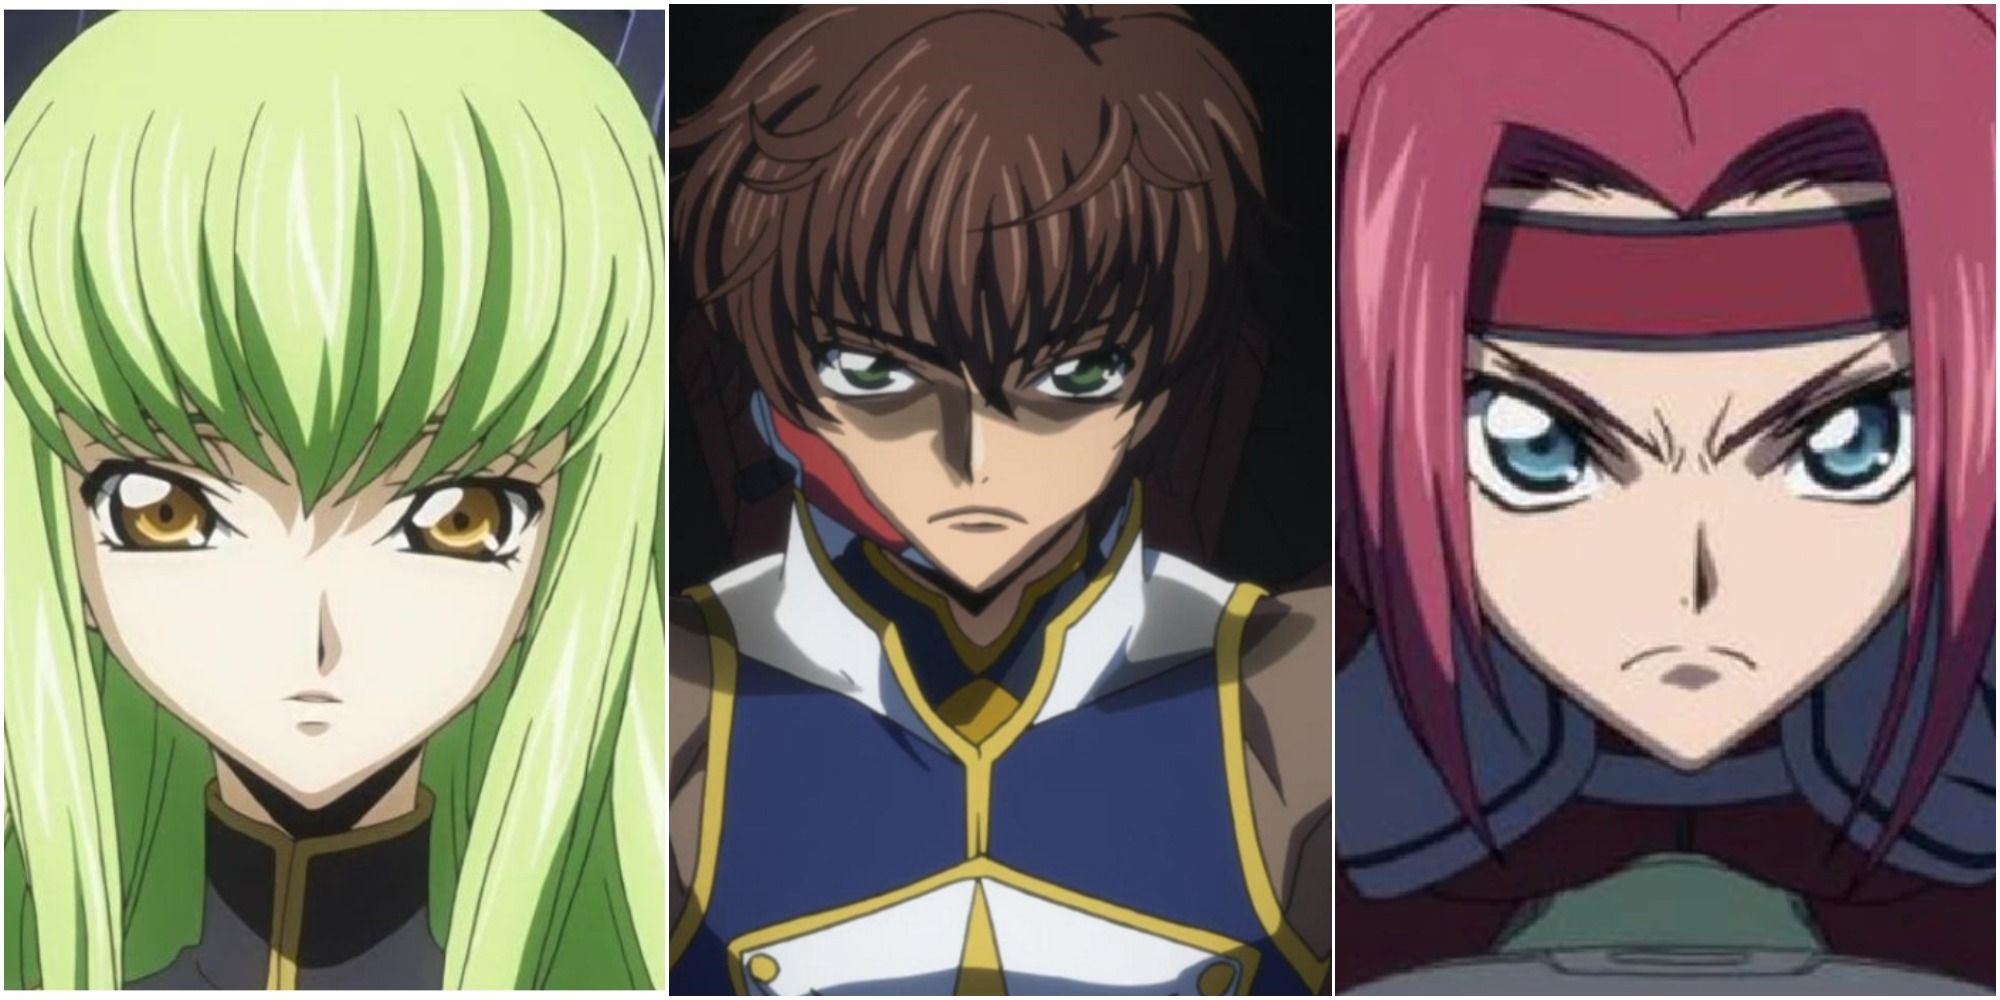 C.c. character from code geass anime on Craiyon